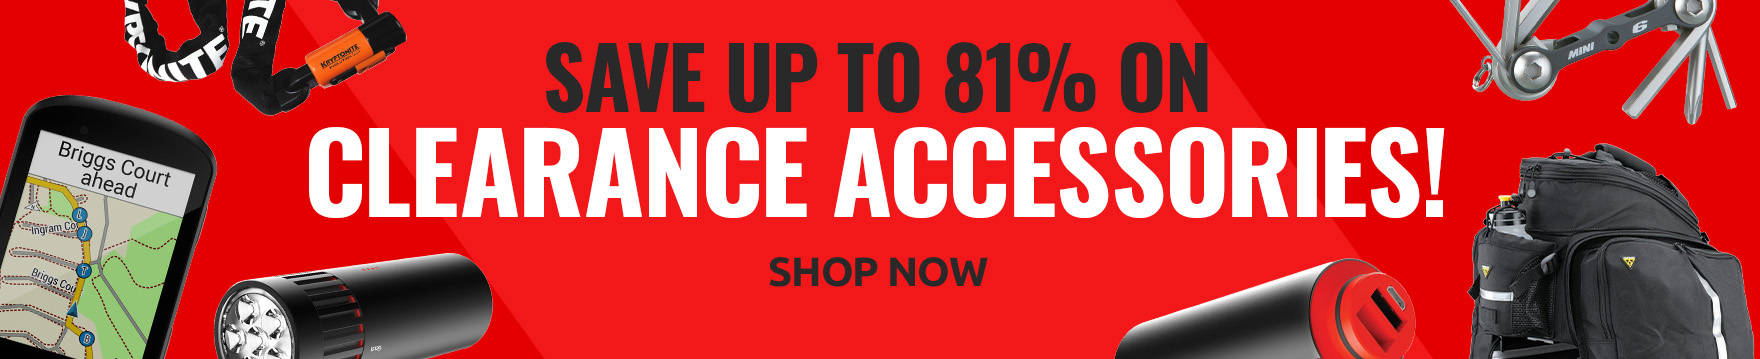 Save on clearance accessories!